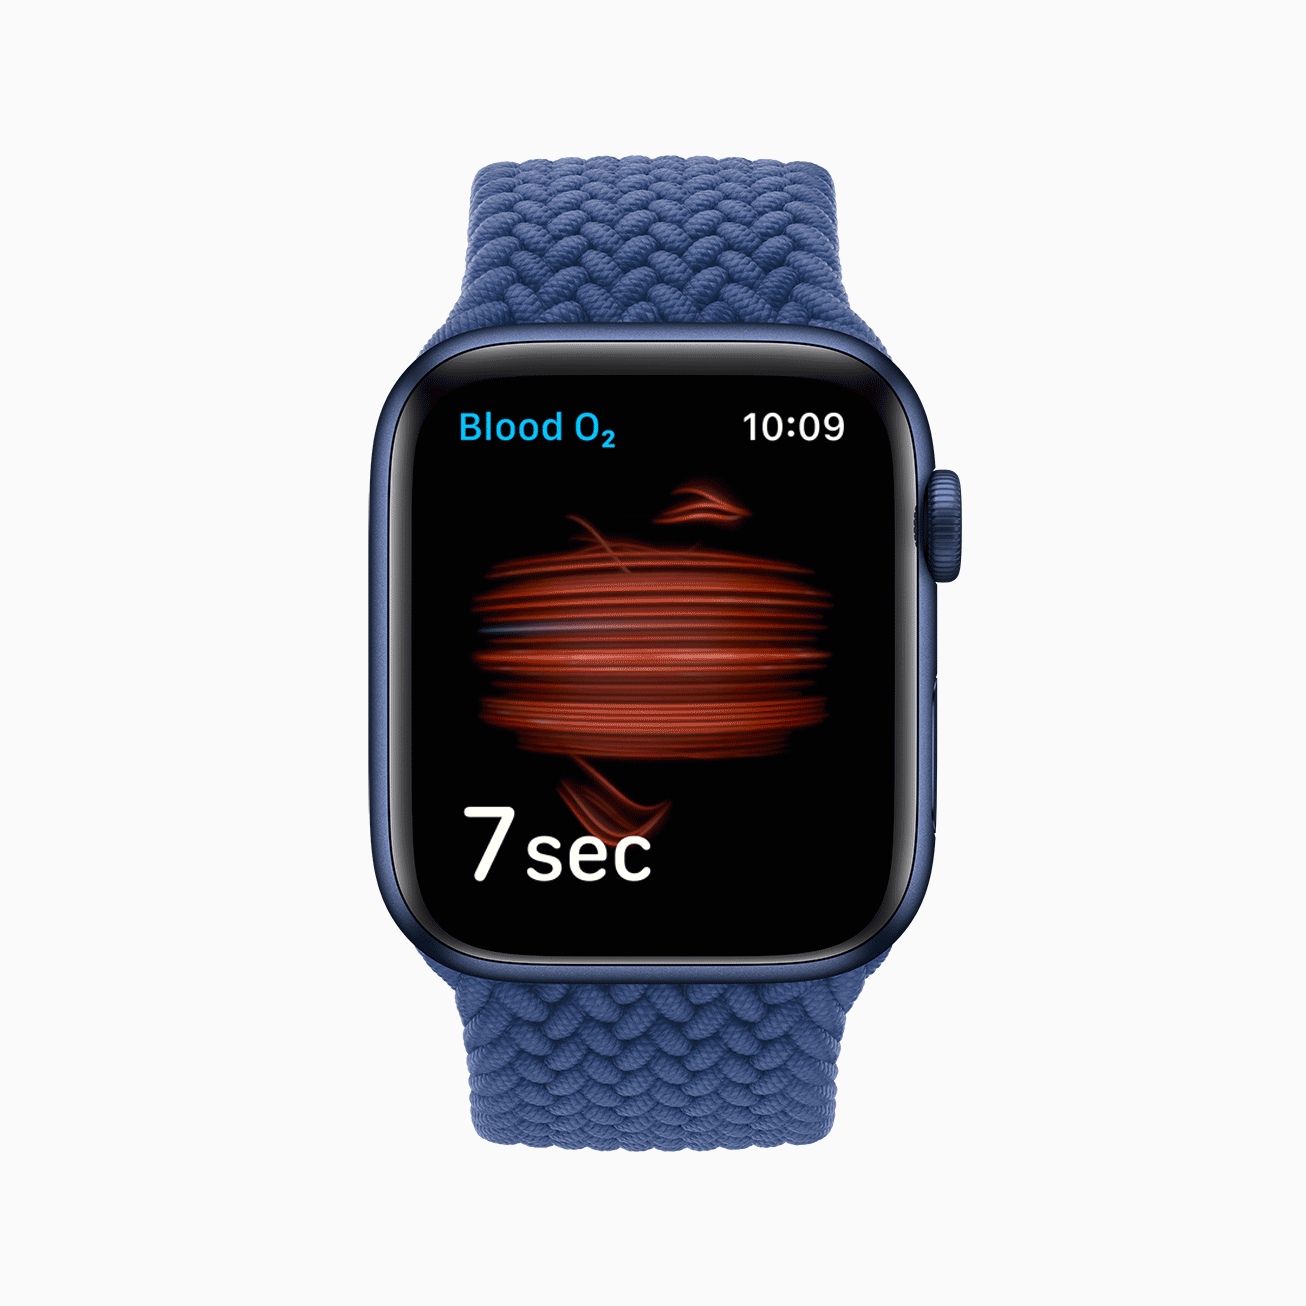 The new Apple Watch Series 6 with Braided Loop Strap